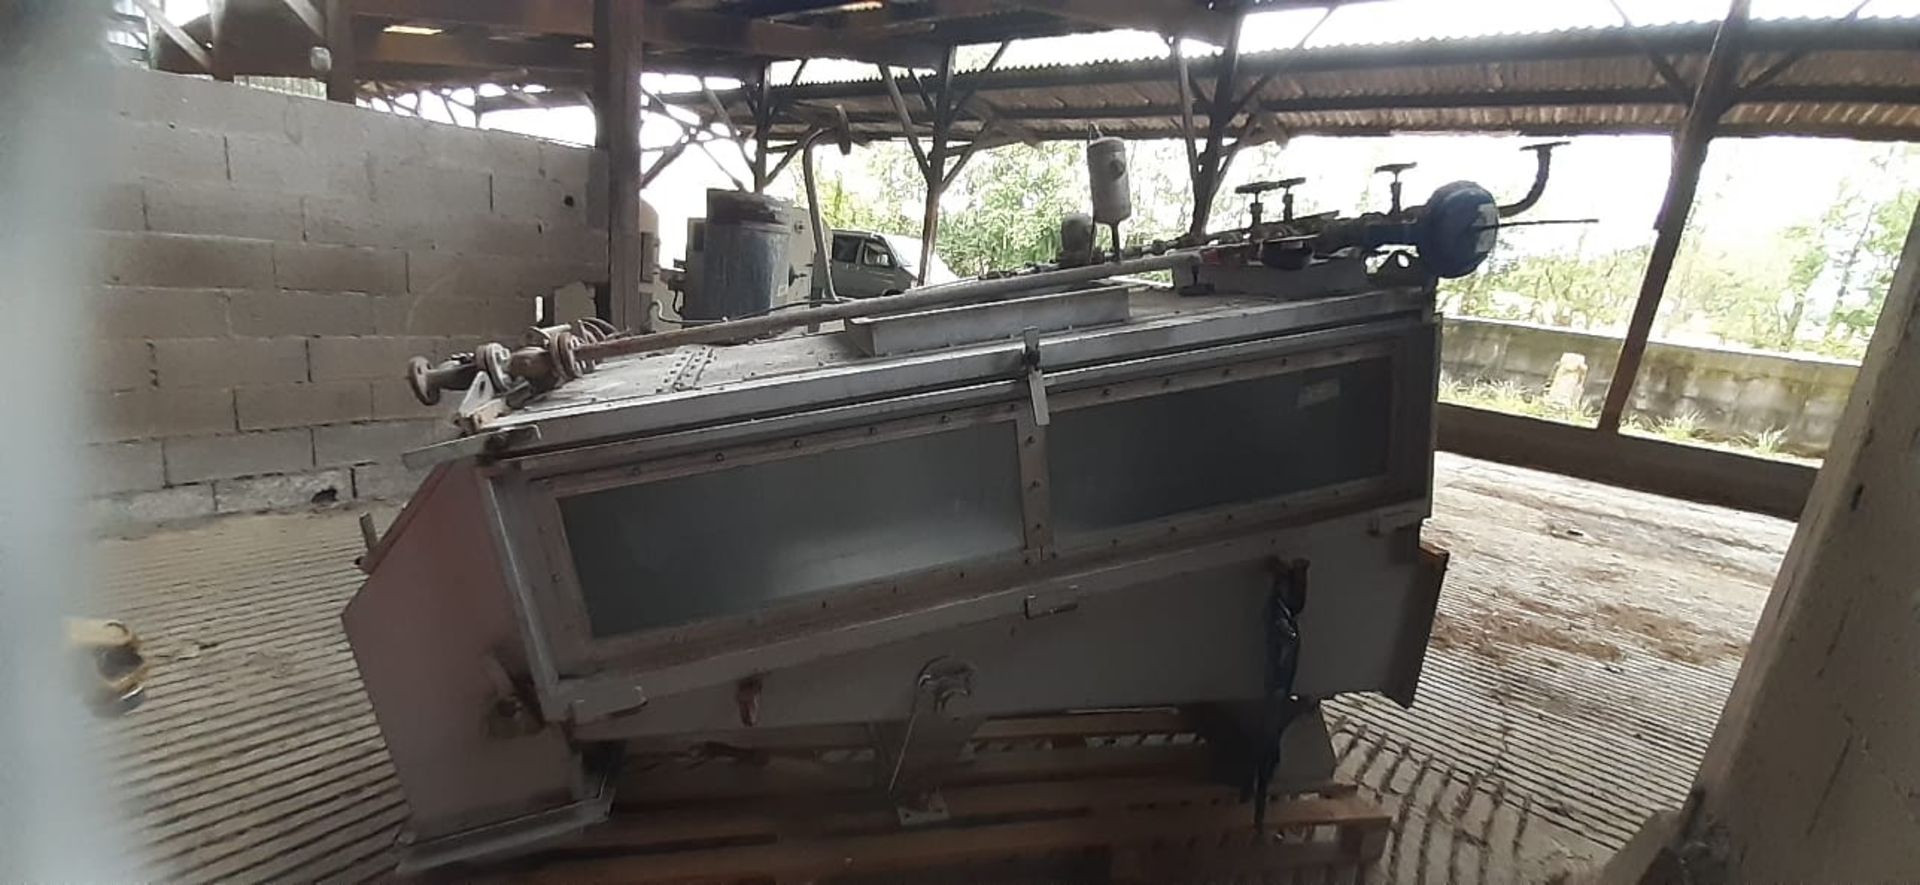 Bed Dryer - Buhler OTW 150 fluid bed dryer/cooler, new 1998 but never used. It can be used to dry or - Image 5 of 11